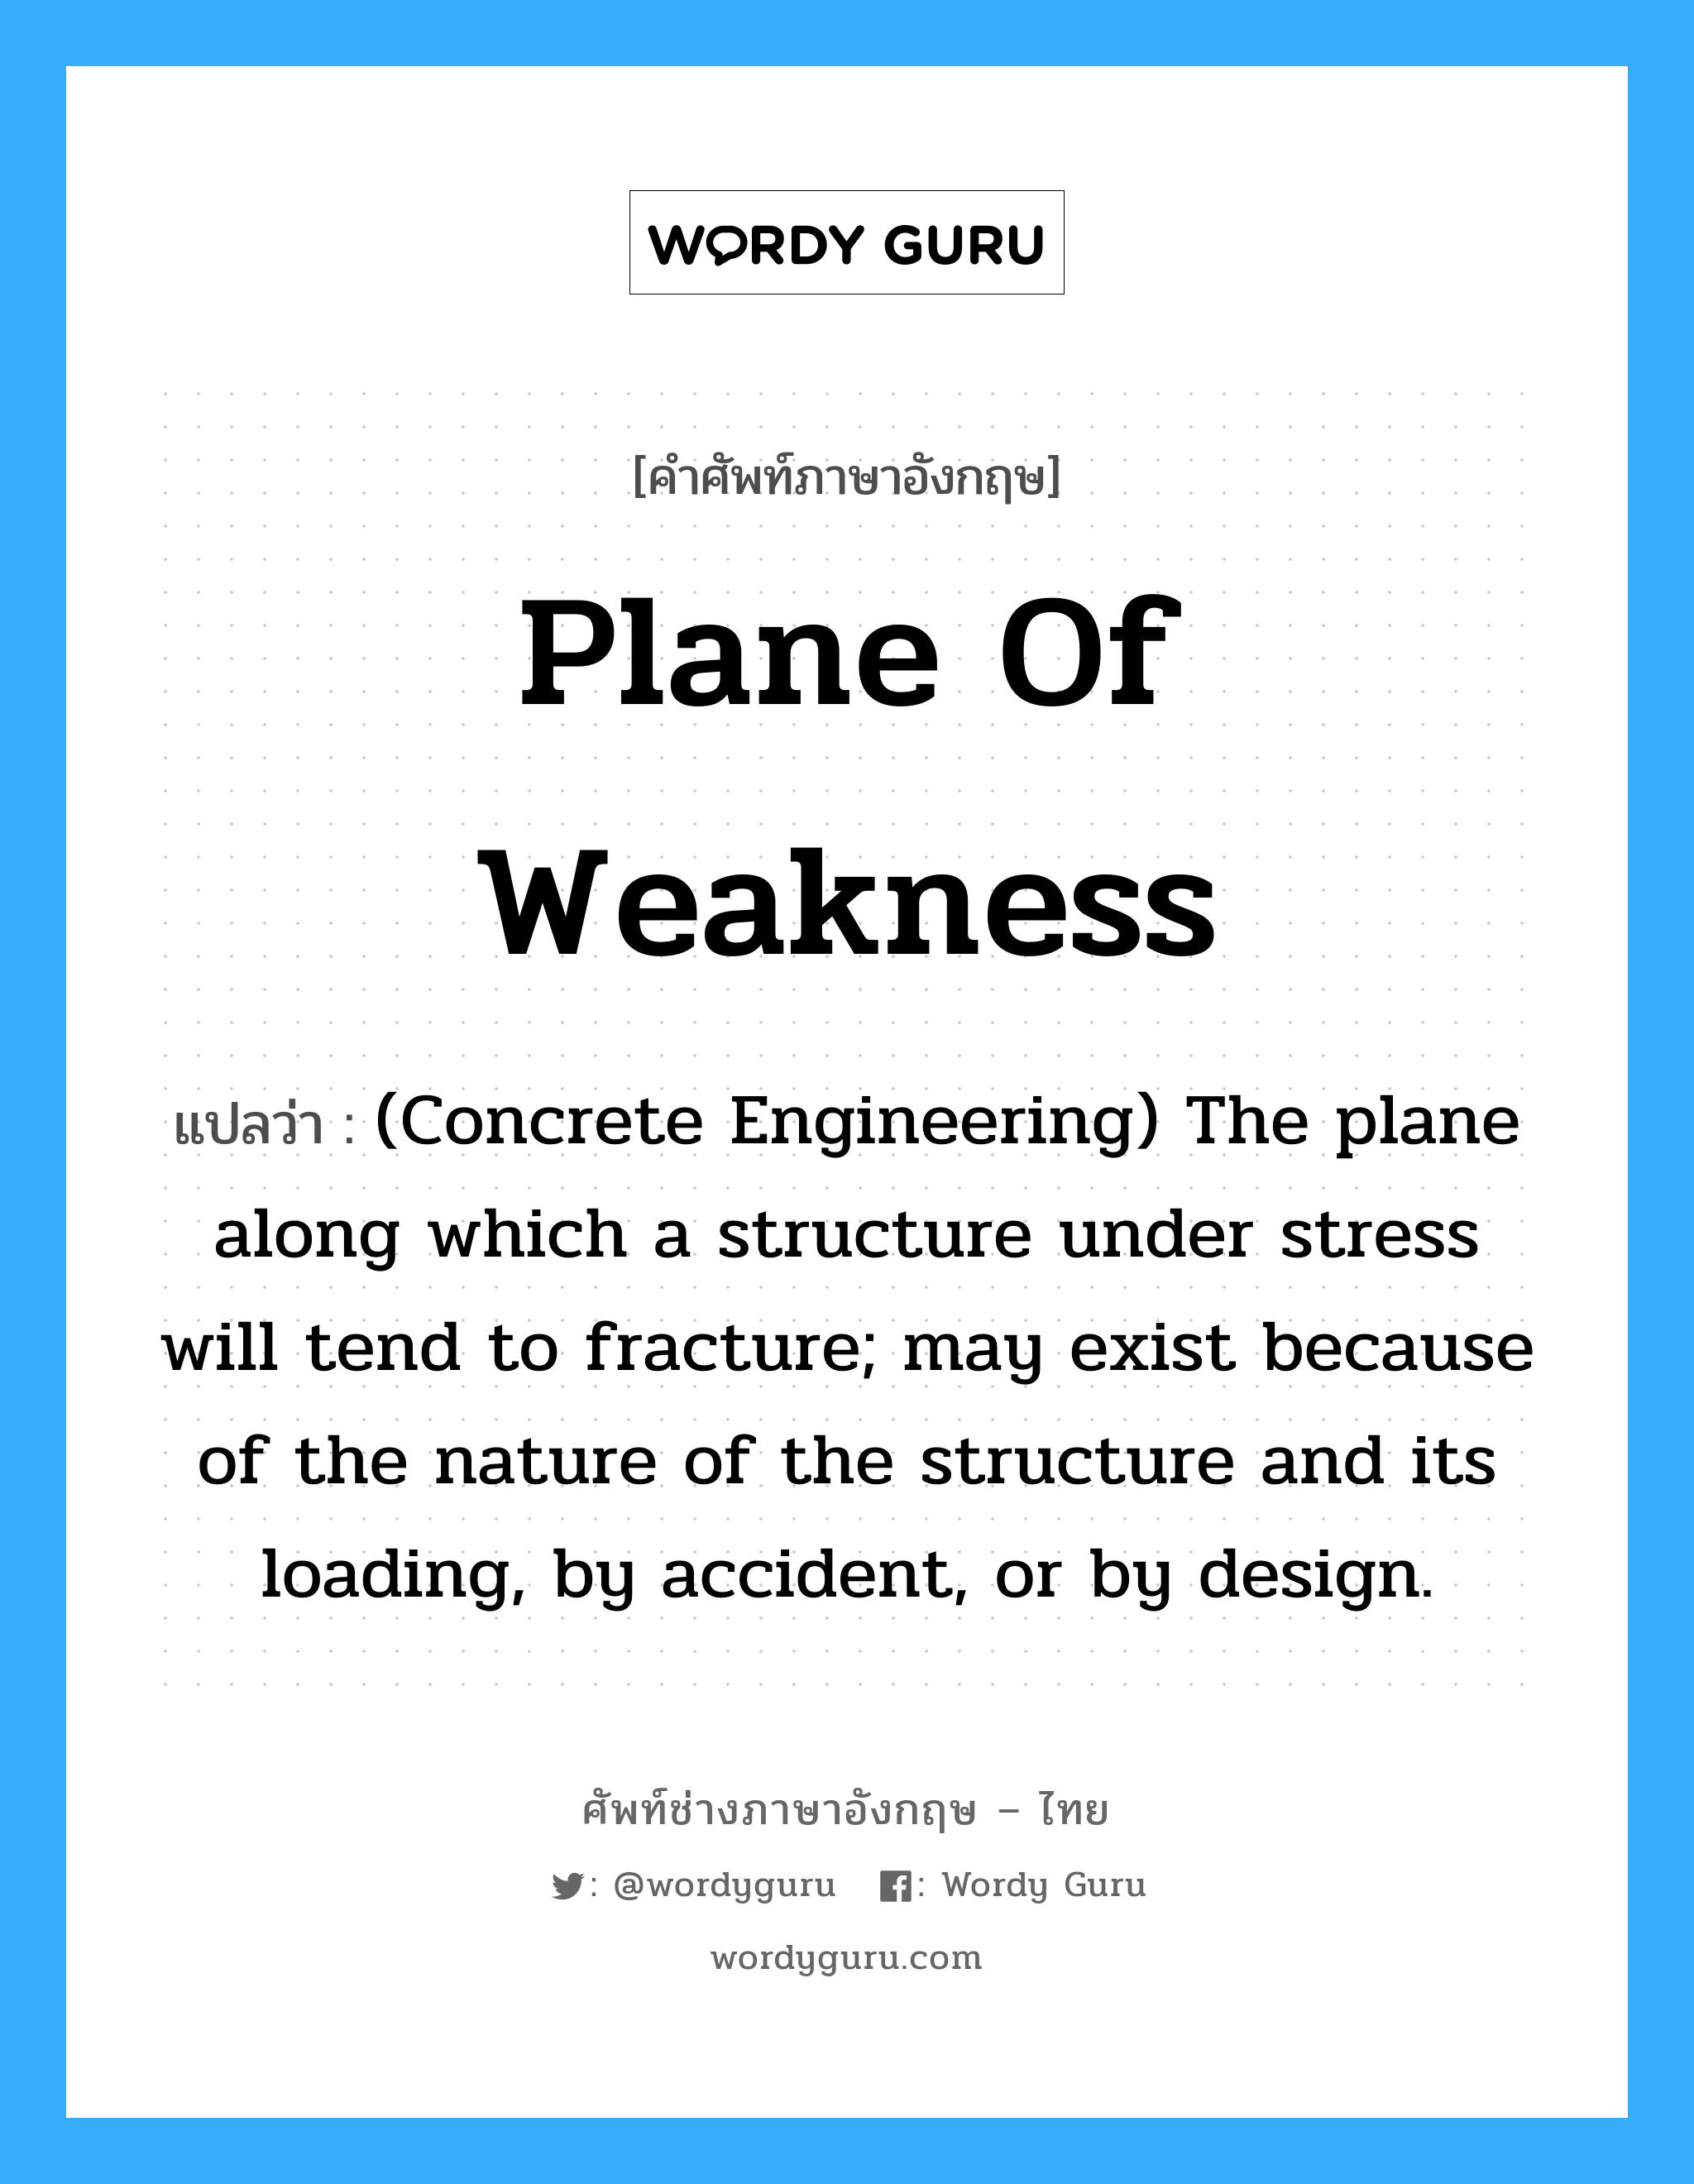 Plane of Weakness แปลว่า?, คำศัพท์ช่างภาษาอังกฤษ - ไทย Plane of Weakness คำศัพท์ภาษาอังกฤษ Plane of Weakness แปลว่า (Concrete Engineering) The plane along which a structure under stress will tend to fracture; may exist because of the nature of the structure and its loading, by accident, or by design.